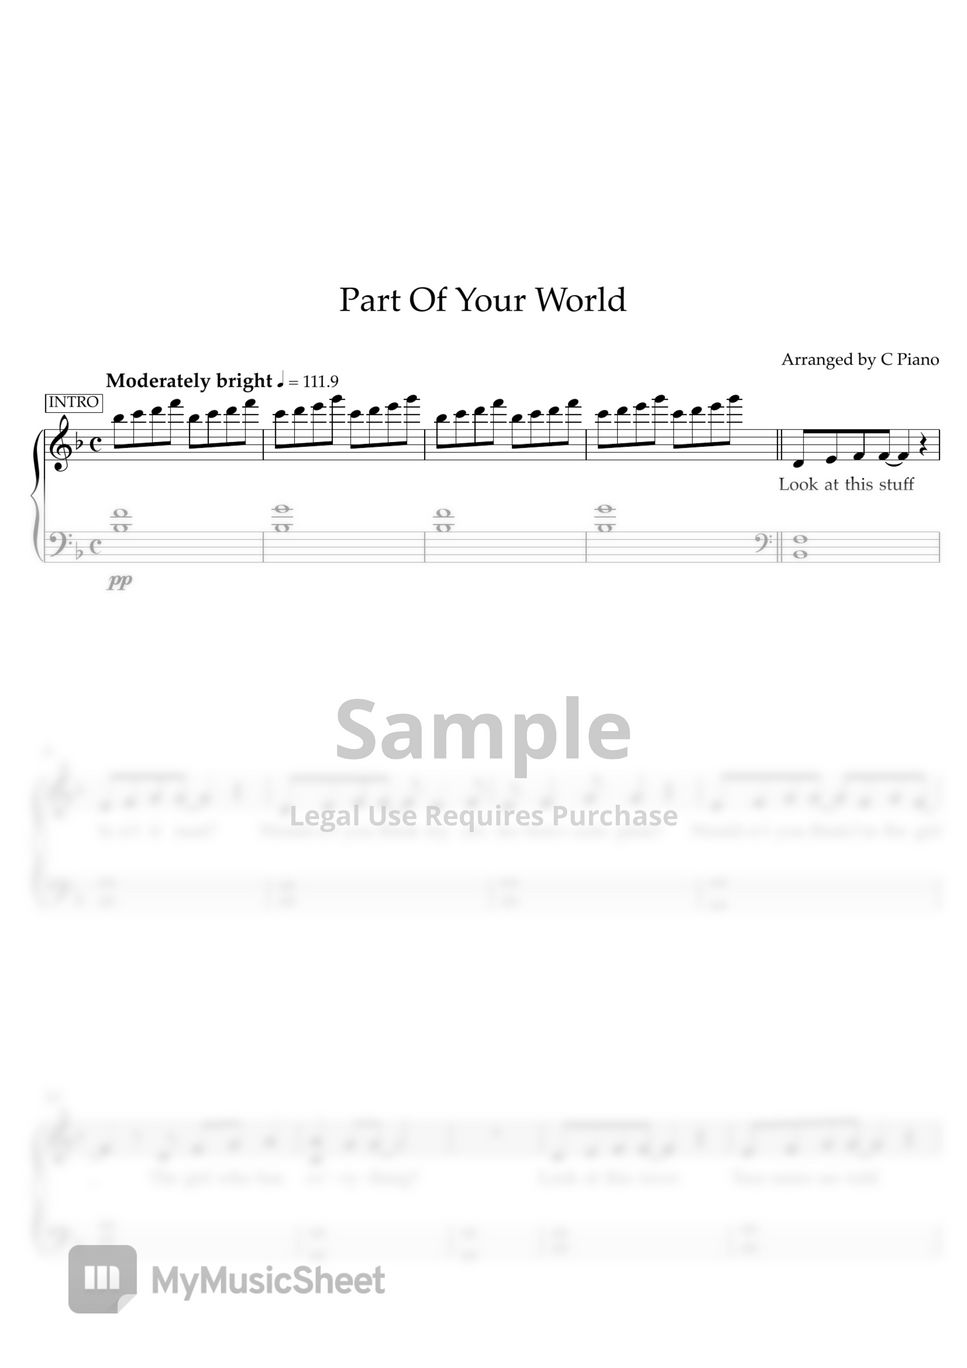 Halle - Part of Your World (Easy Version) by C Piano